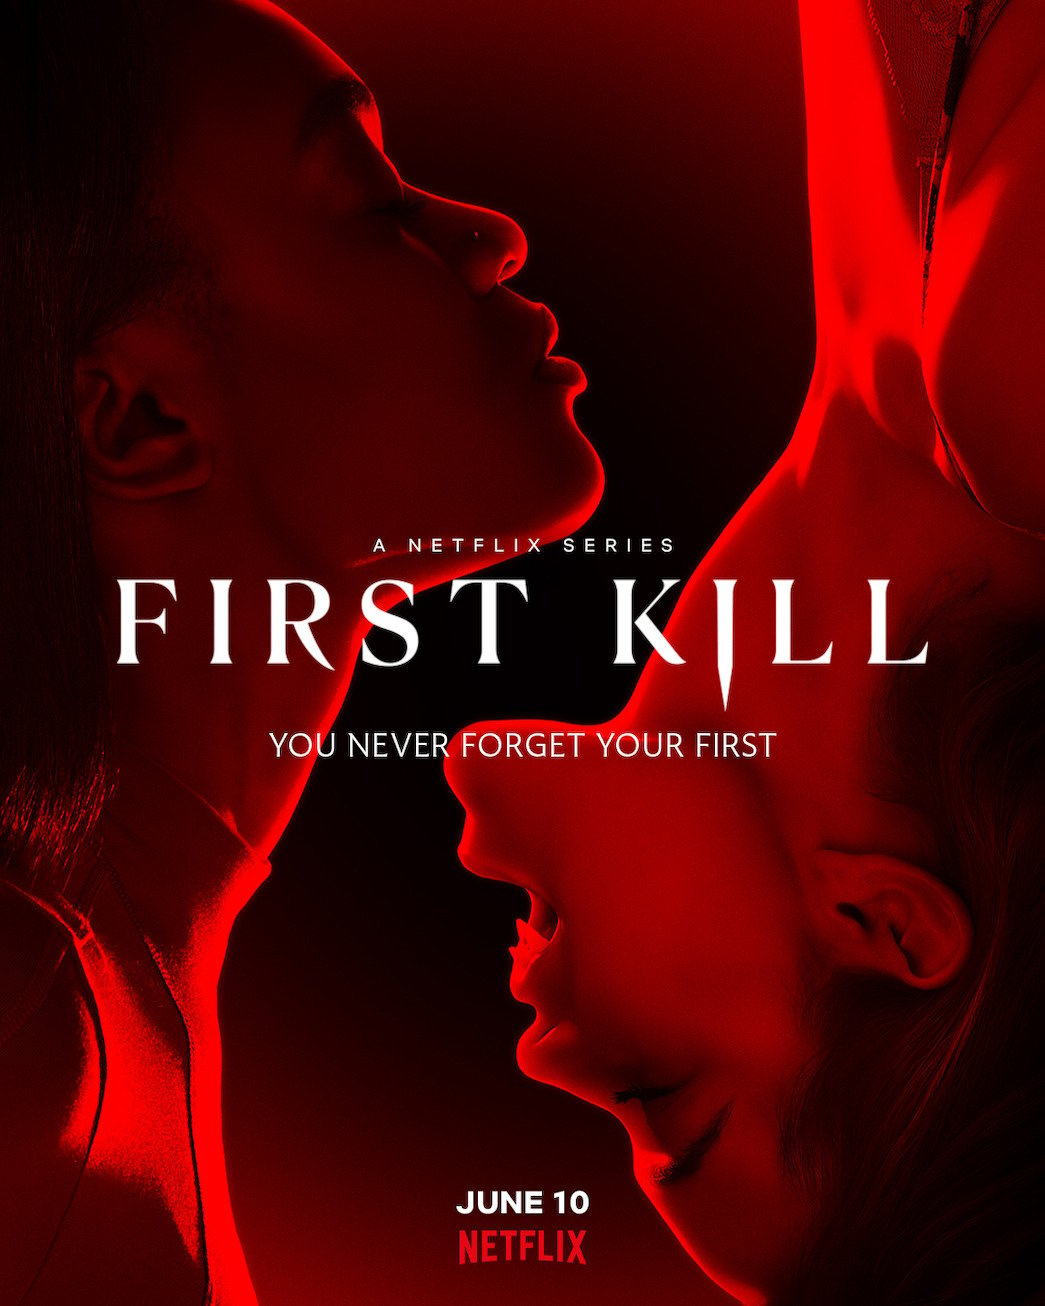 First Kill' Netflix Release Date and Photo Announced